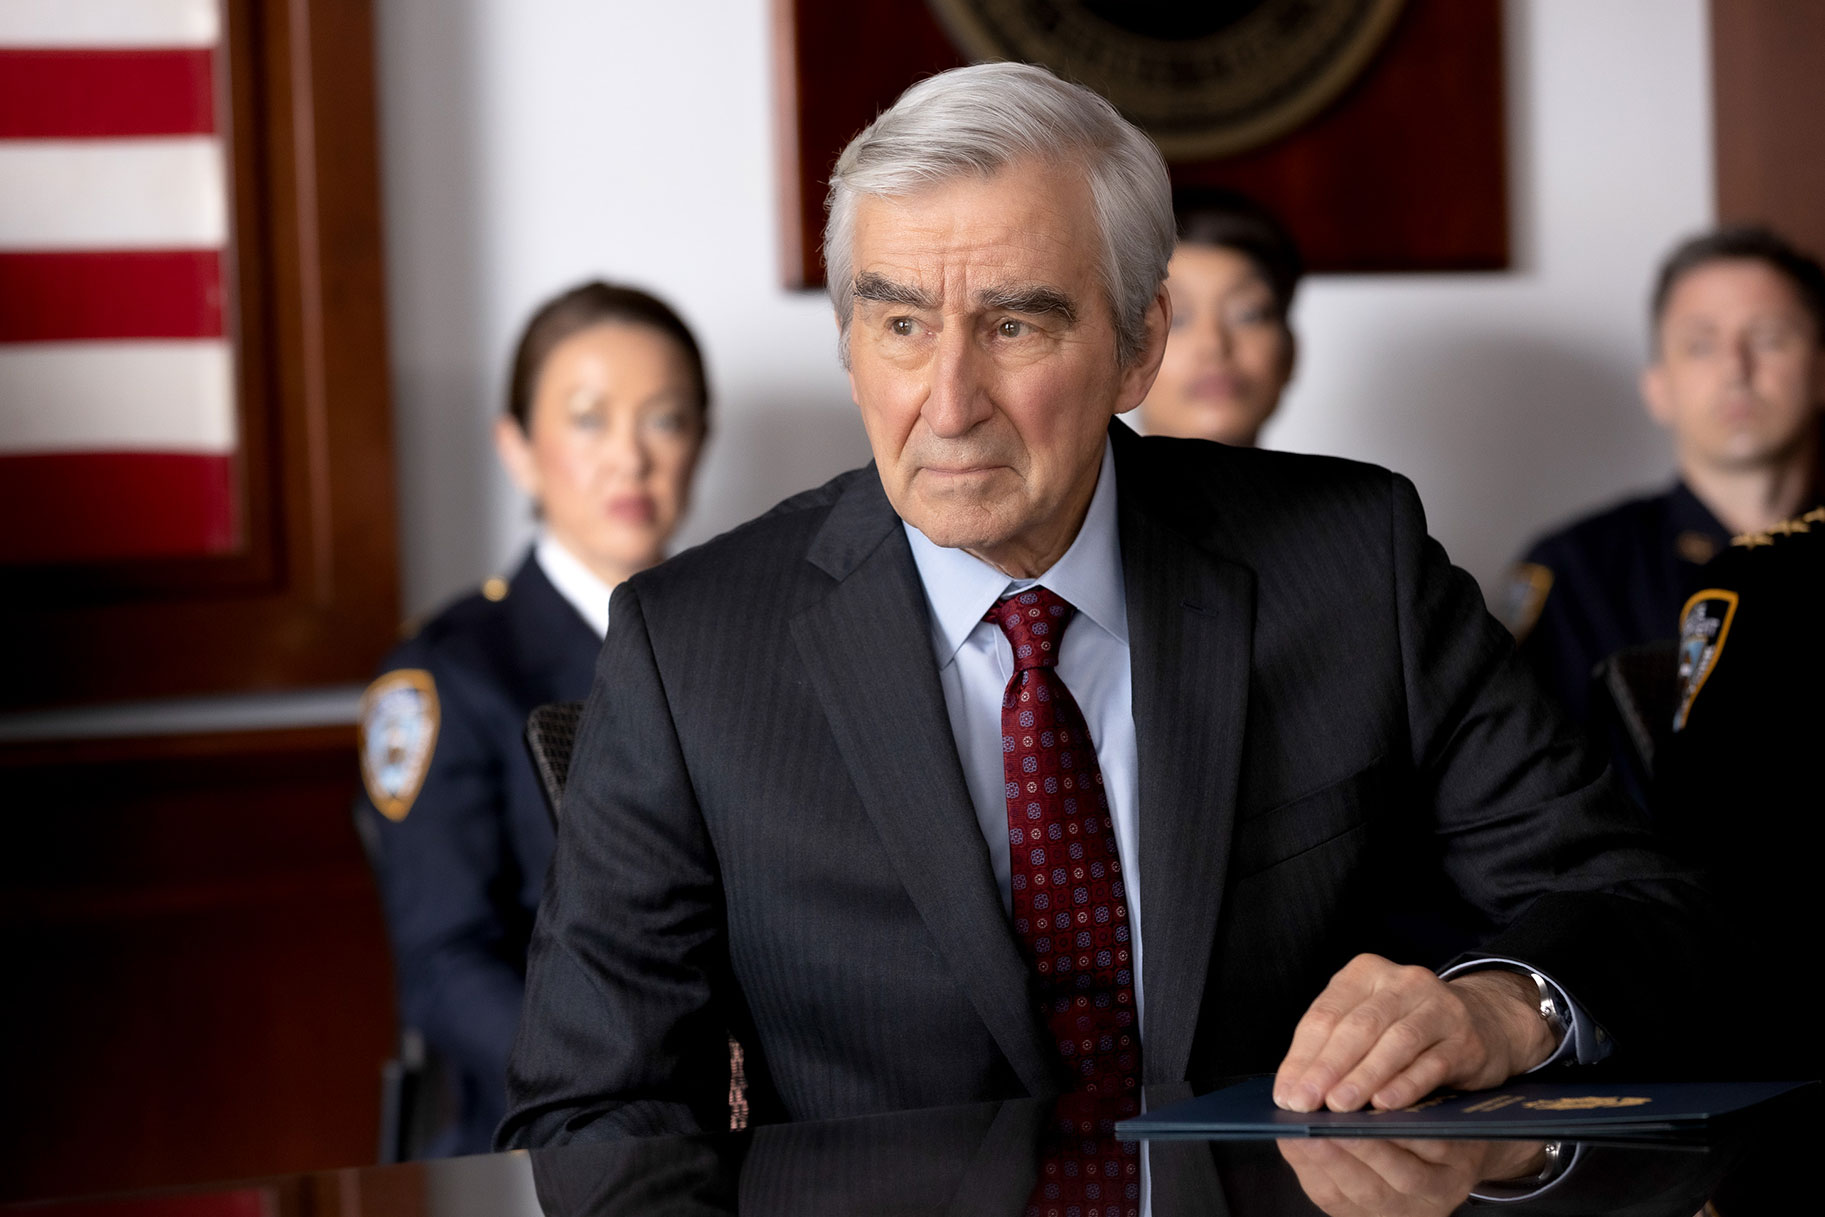 Law And Order's Sam Waterson